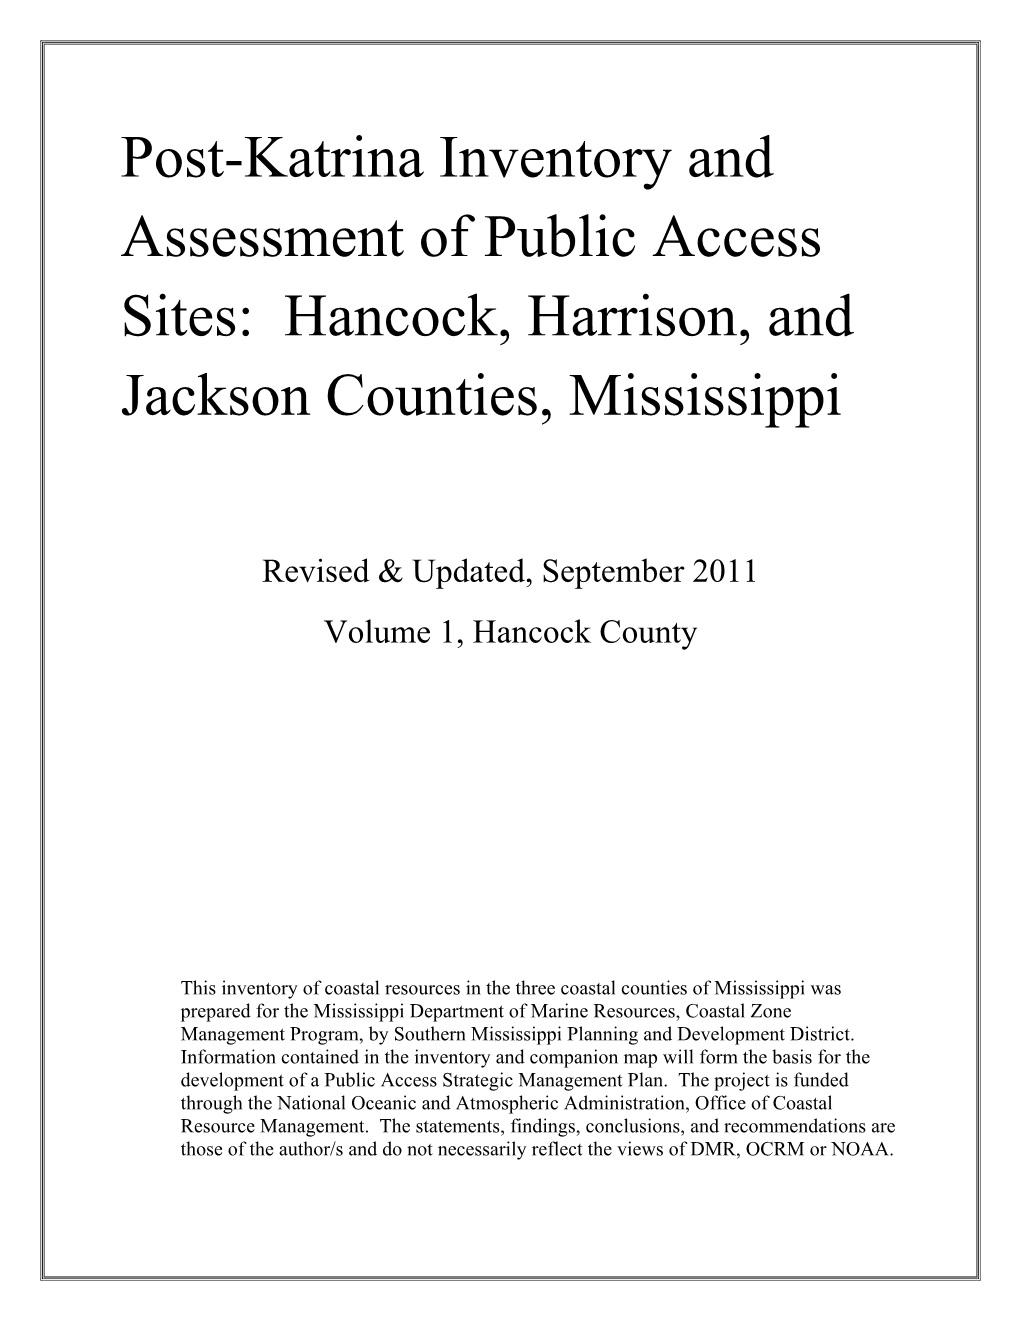 Post-Katrina Inventory and Assessment of Public Access Sites: Hancock, Harrison, and Jackson Counties, Mississippi